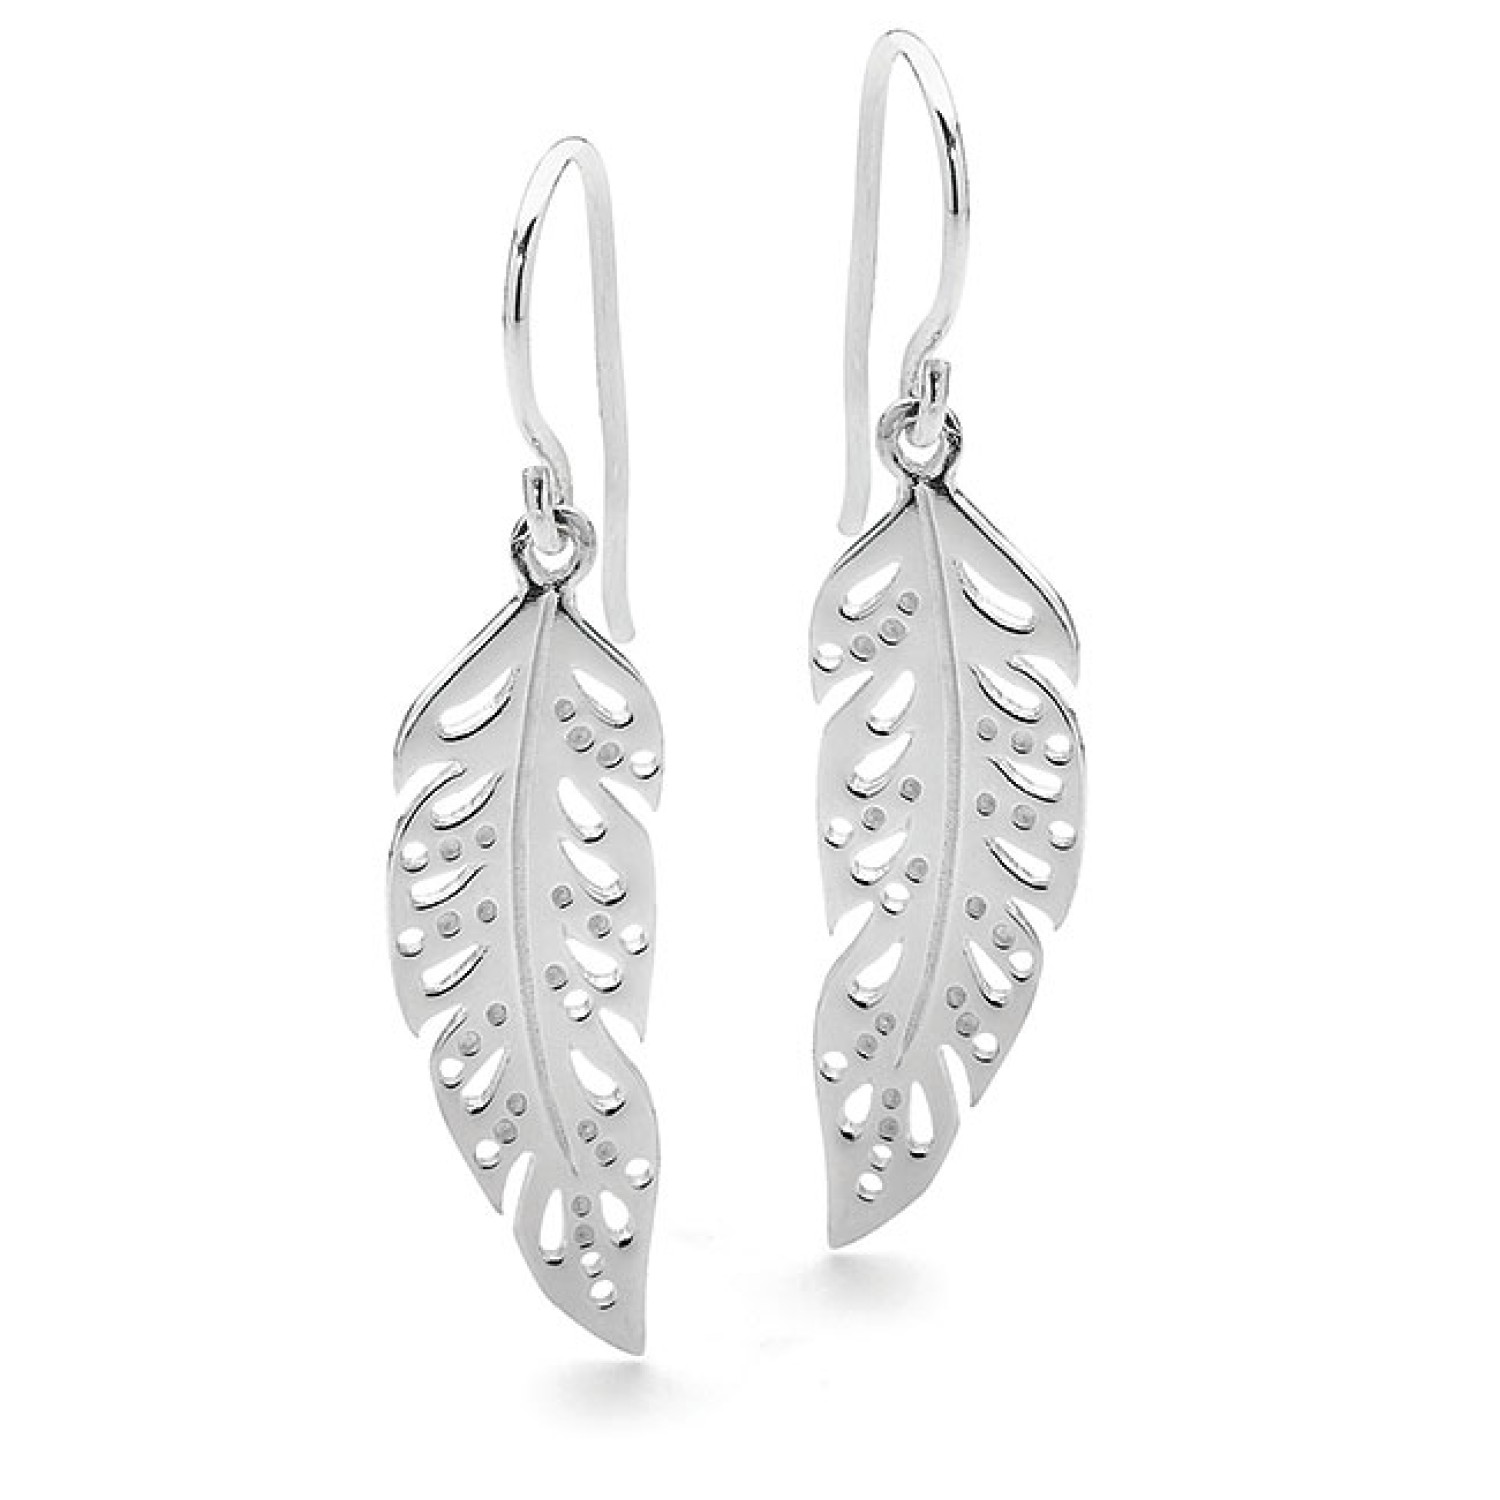 Silver Feather Earrings. Sterling silver Feather earrings  Gift boxed Crafted in 925 Sterling Silver 26mm in length Hook fitting 5 Year Christies Guarantee 3 Months No Payments and Interest for Q Card holders   @christies.online